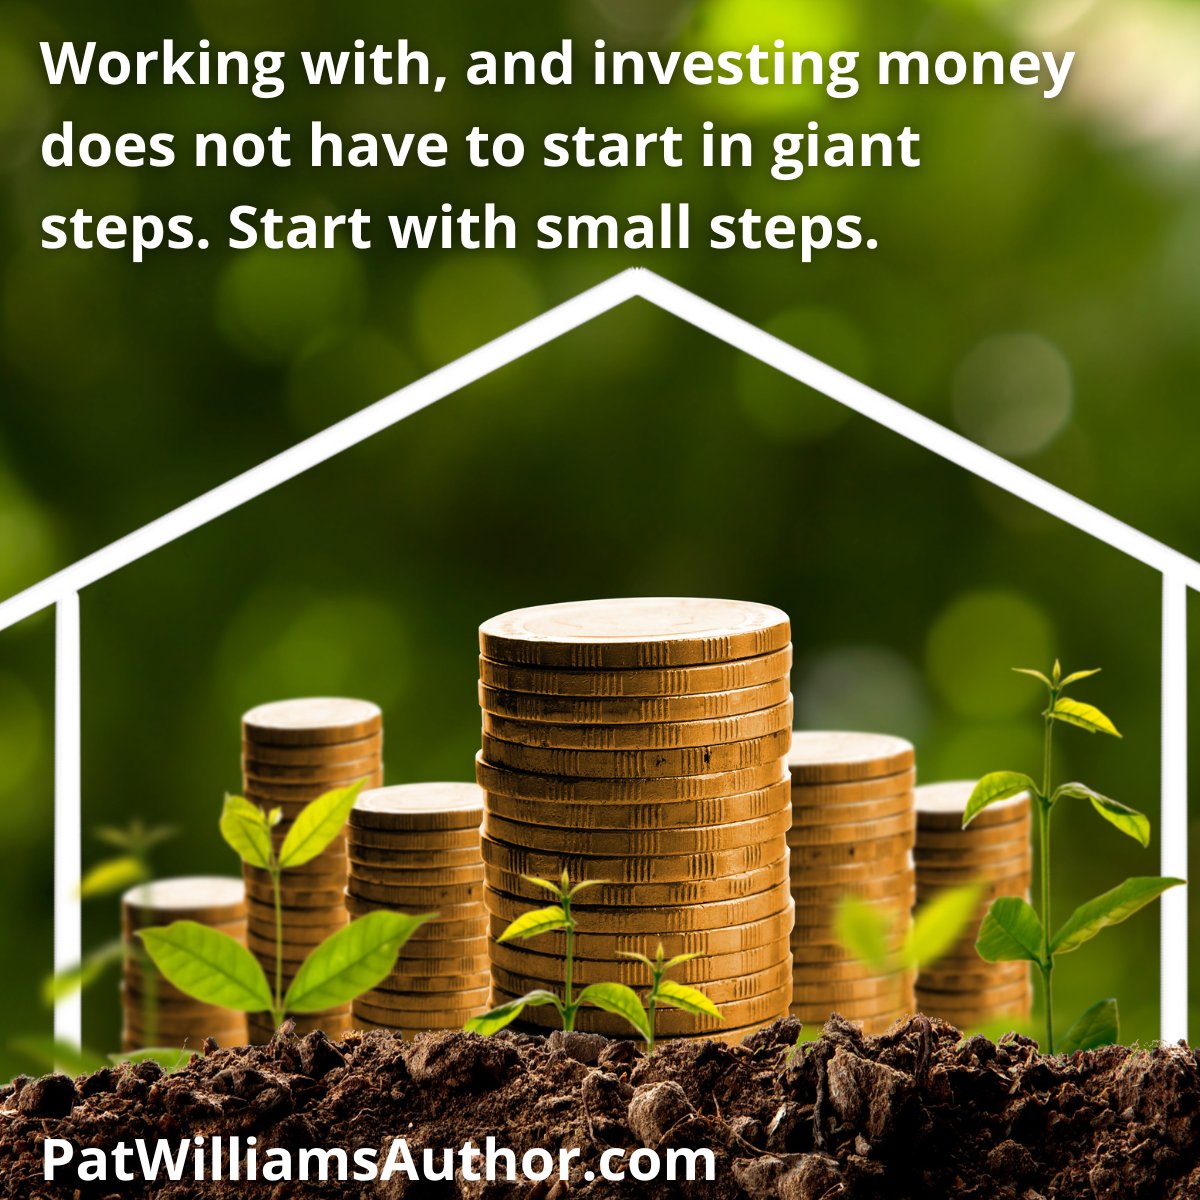 Working with, and investing money does not have to start in giant steps. Start with small steps.

 Get your copy here: amzn.to/3pfzIvK

#personalfinance  #financialfreedom #finance #money #financialliteracy #financialindependence #budgeting #debtfreecommunity